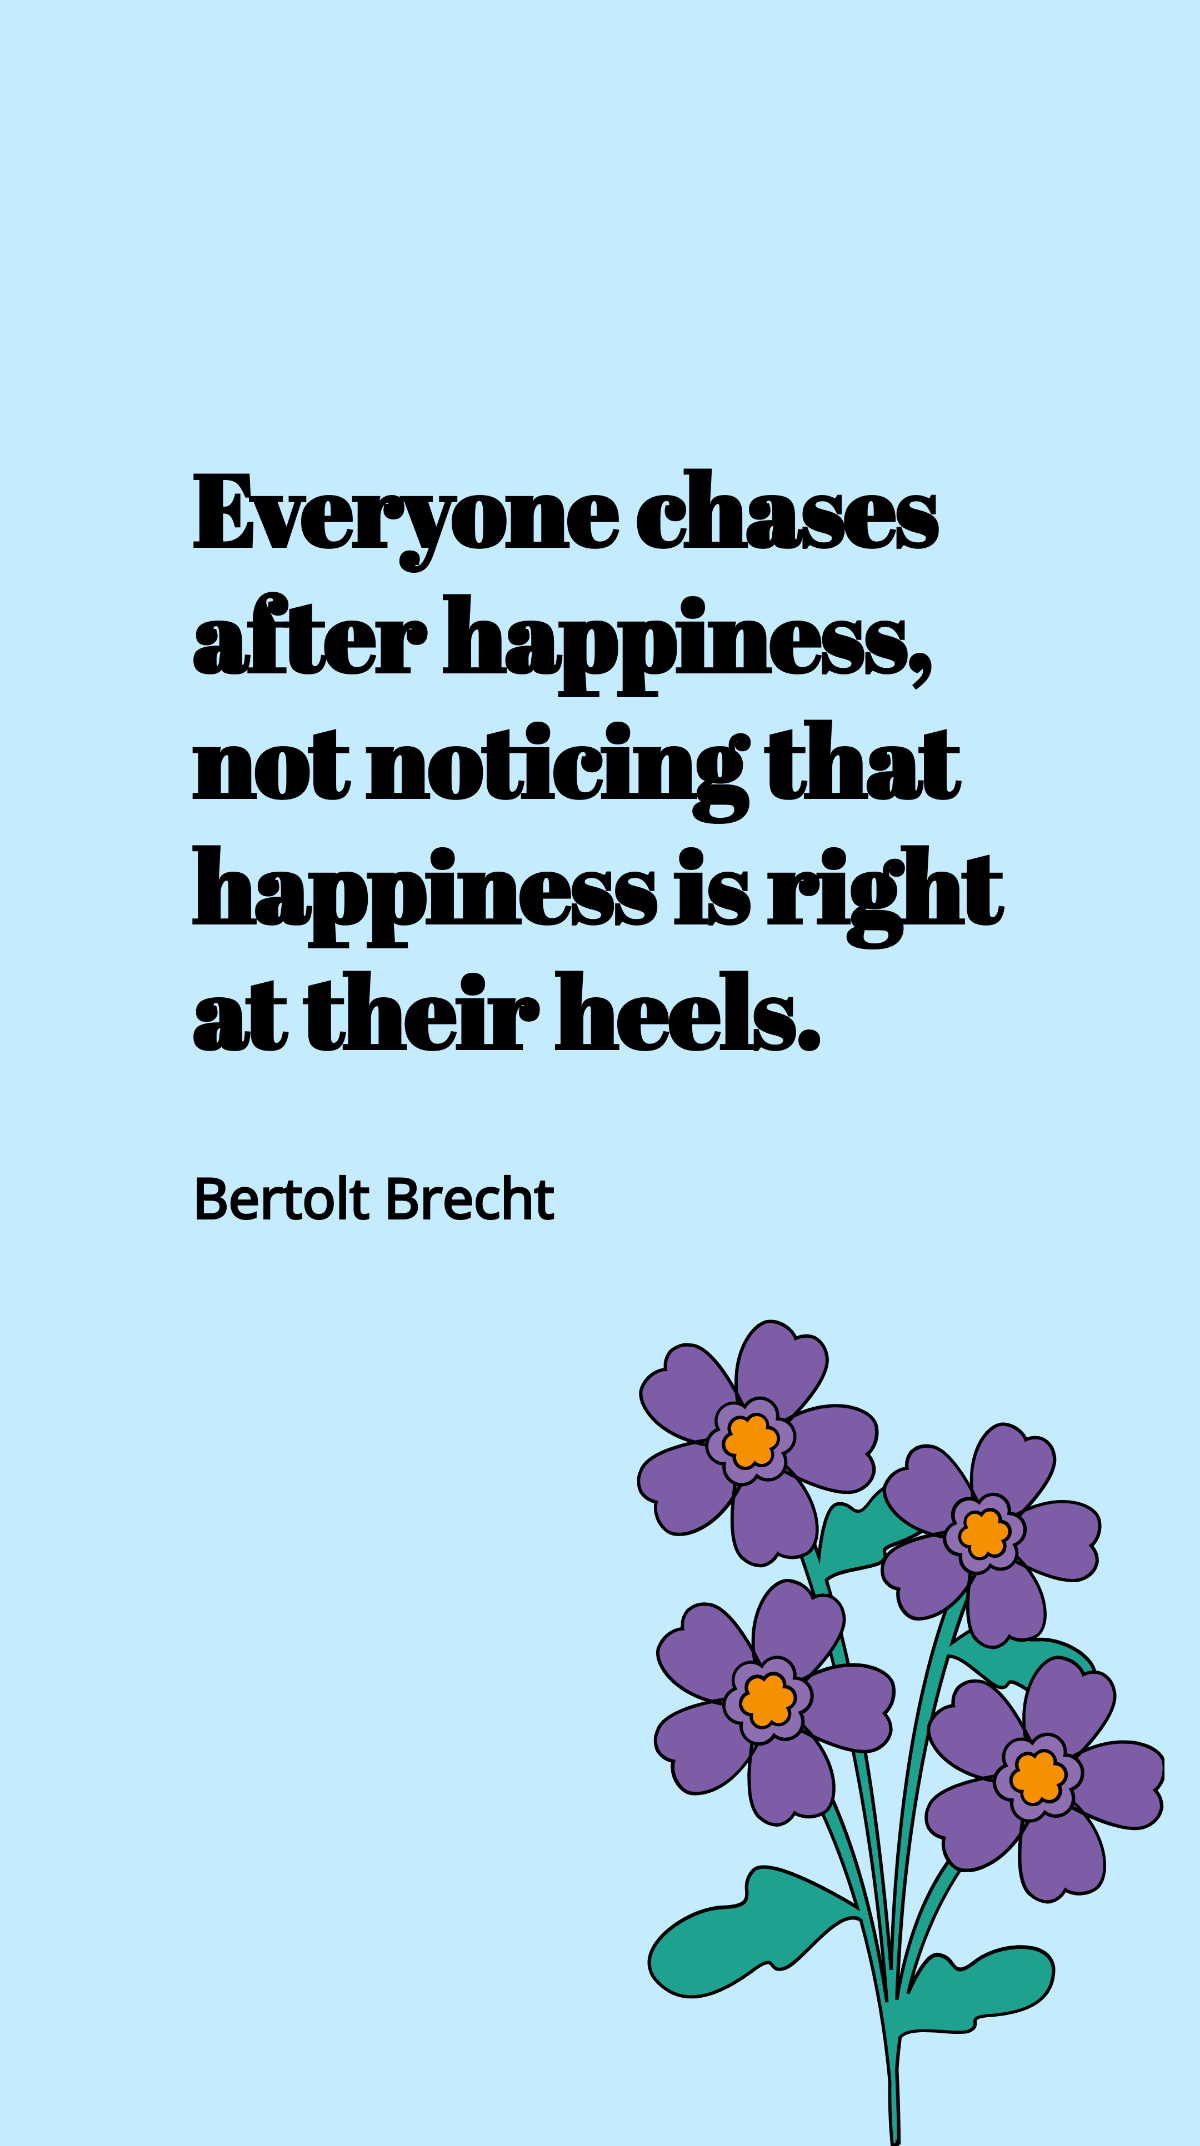 Bertolt Brecht - Everyone chases after happiness, not noticing that happiness is right at their heels. Template